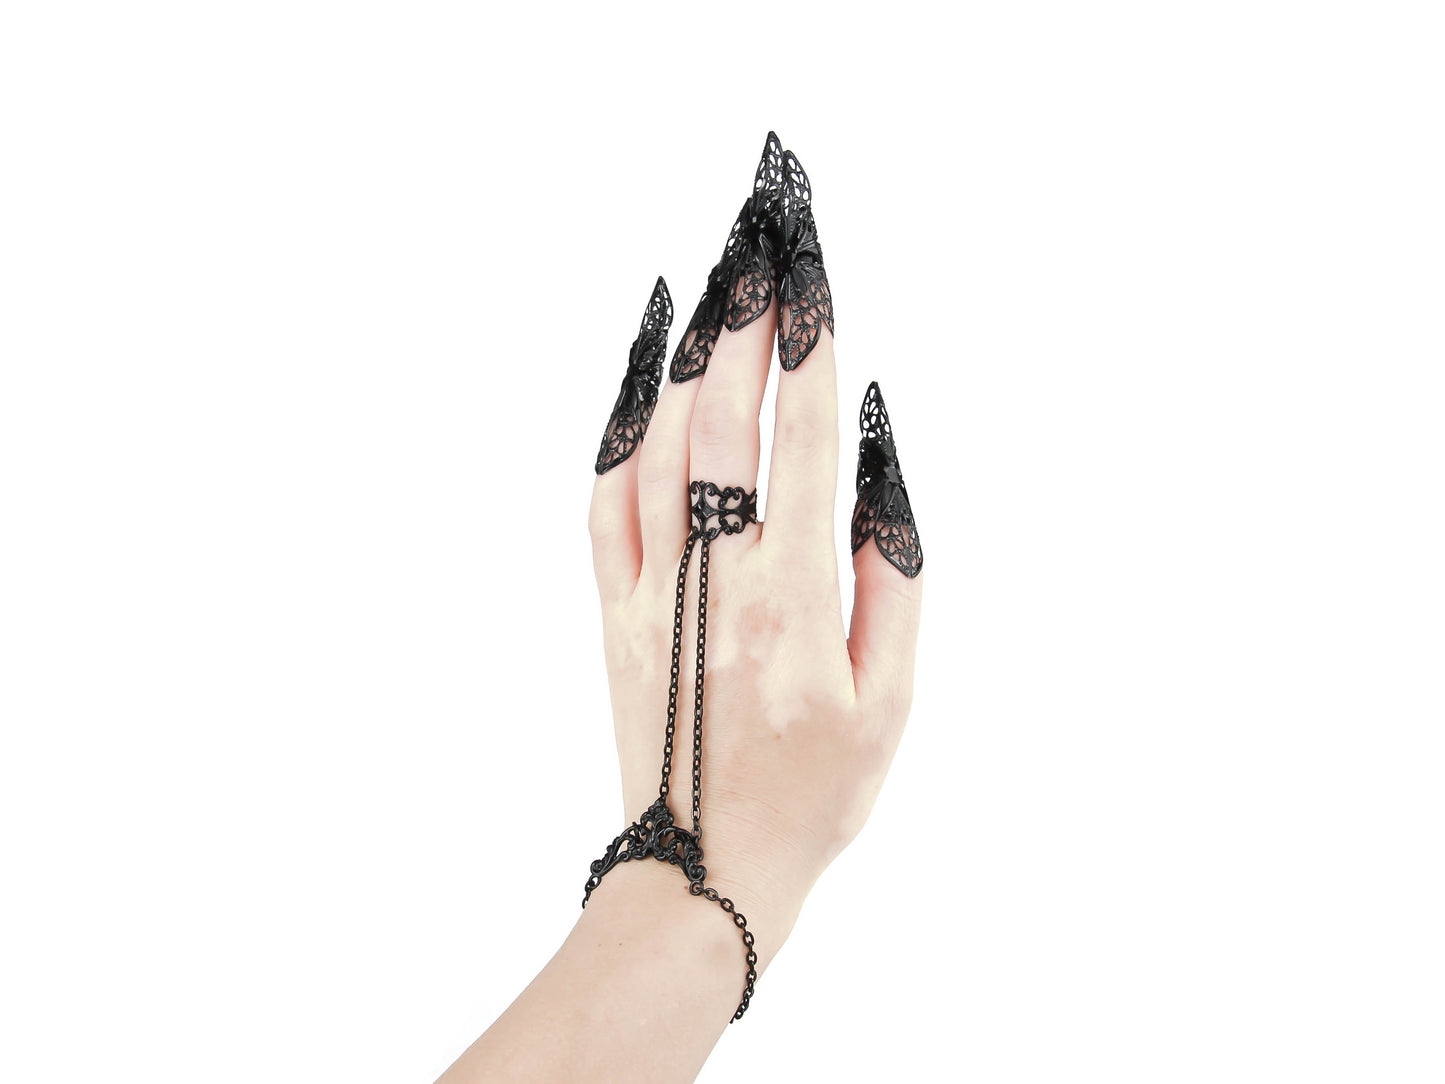 A striking Myril Jewels hand chain bracelet ring cascades from a baroque filigree ring down to a matching wrist adornment, paired with long, ornate nail claw rings. This dark, avant-garde set is a masterpiece of gothic chic, ideal for those who adore Halloween jewelry, Punk aesthetics, and Neo Gothic finery. Each intricate claw ring is a testament to the artistry that caters to the whims of Witchcore enthusiasts and festival-goers seeking minimal goth elegance